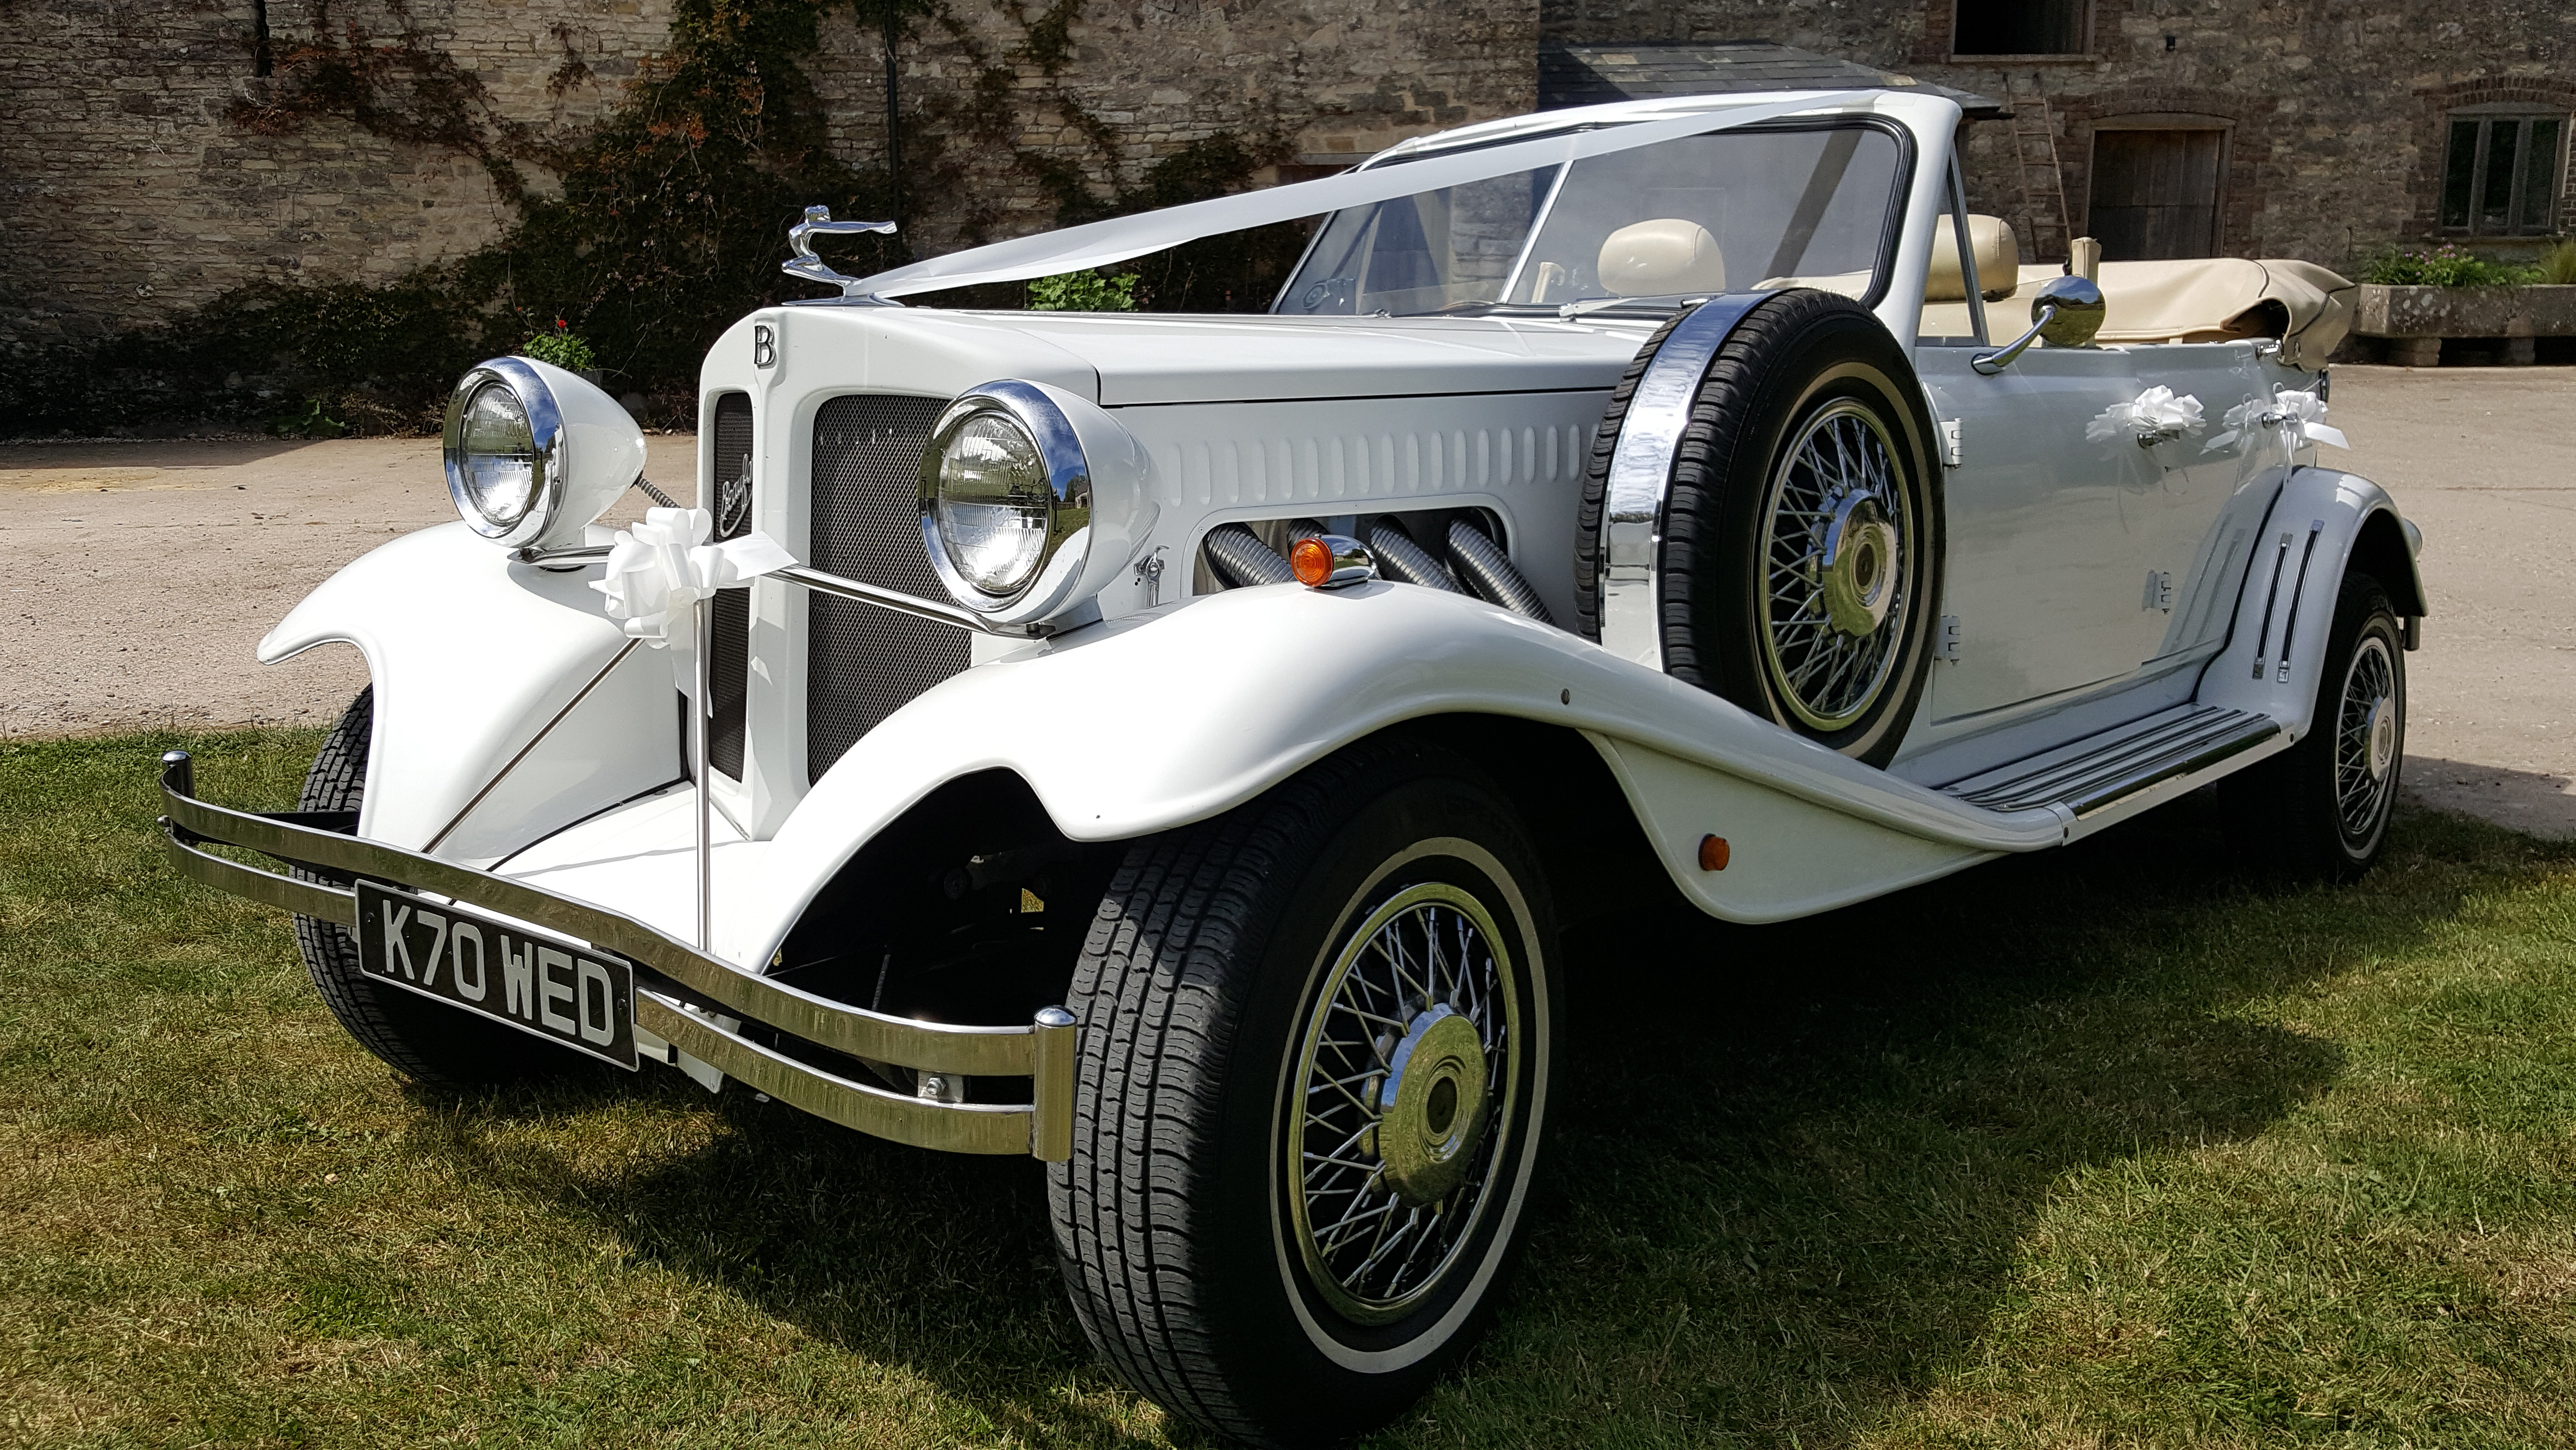 Beauford front 3/4 view with wedding ribbons